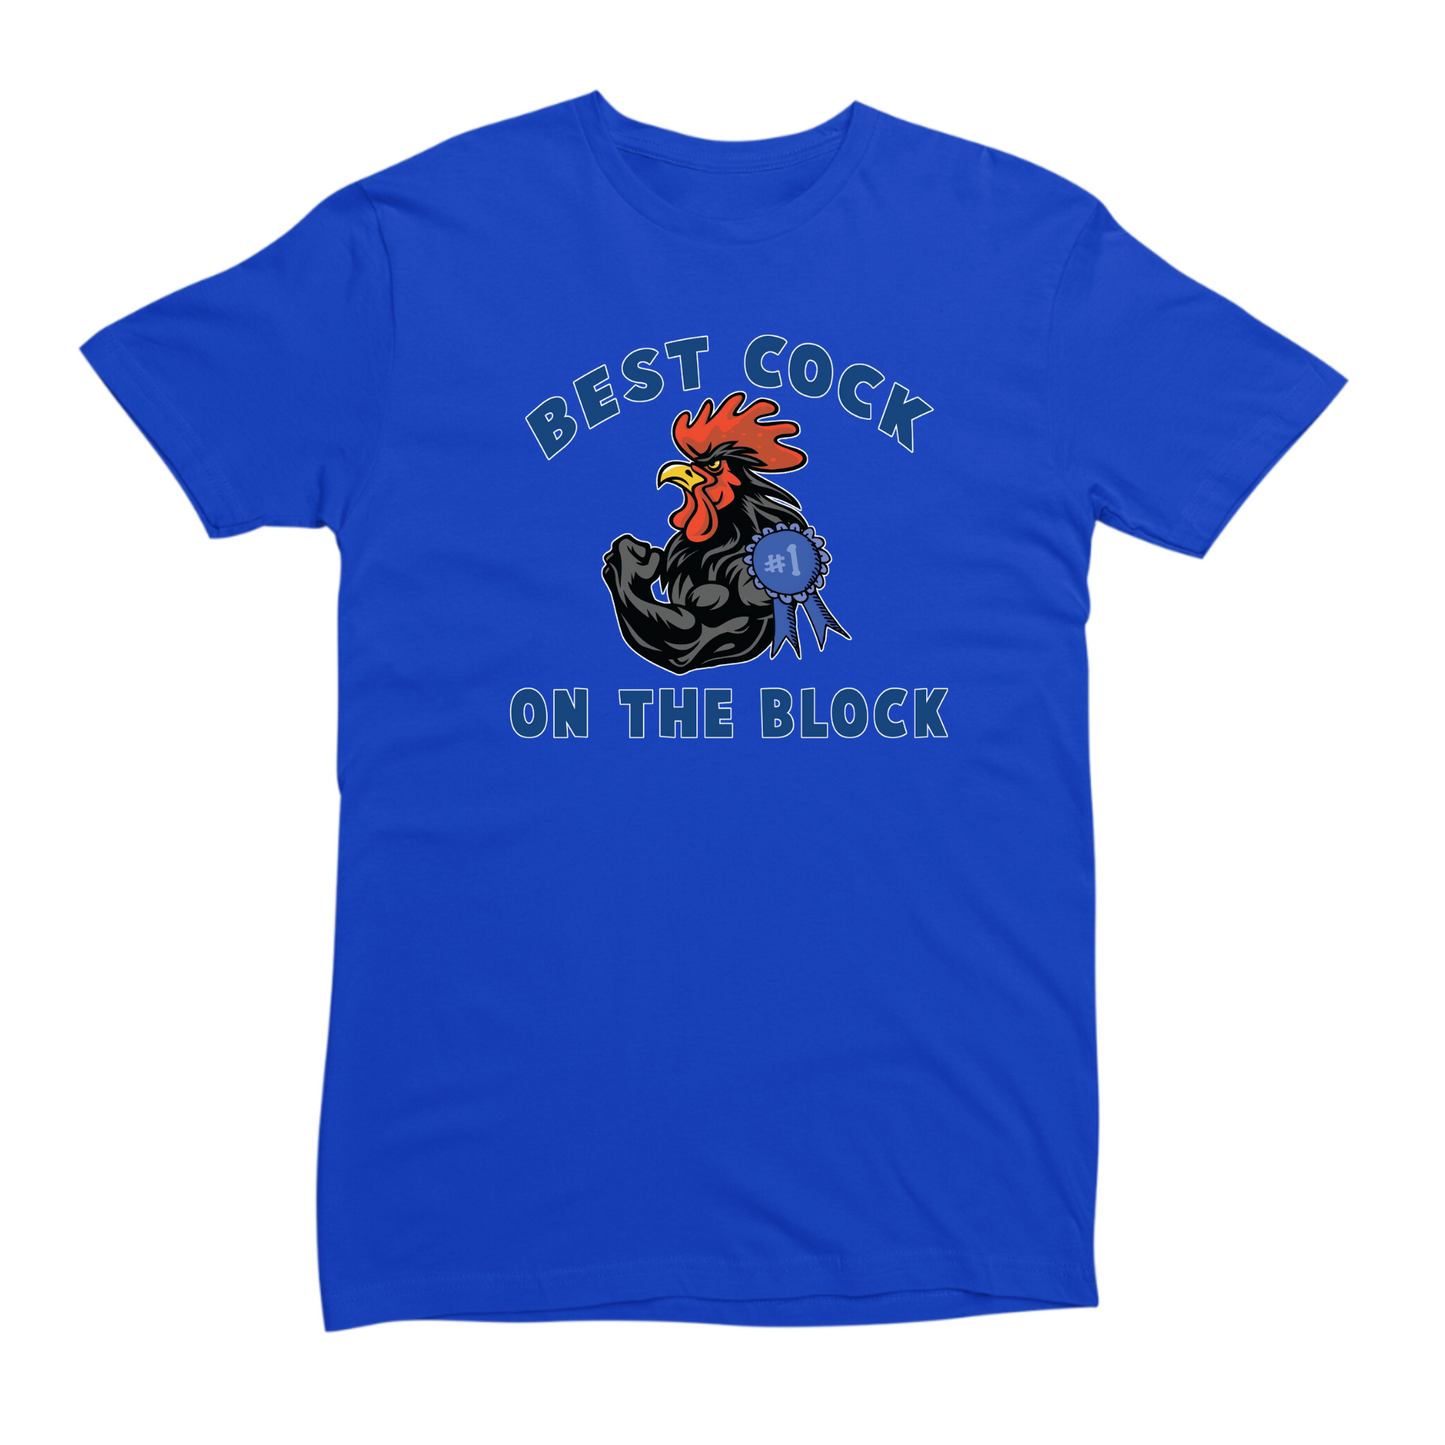 Best Cock On The Block Tshirt